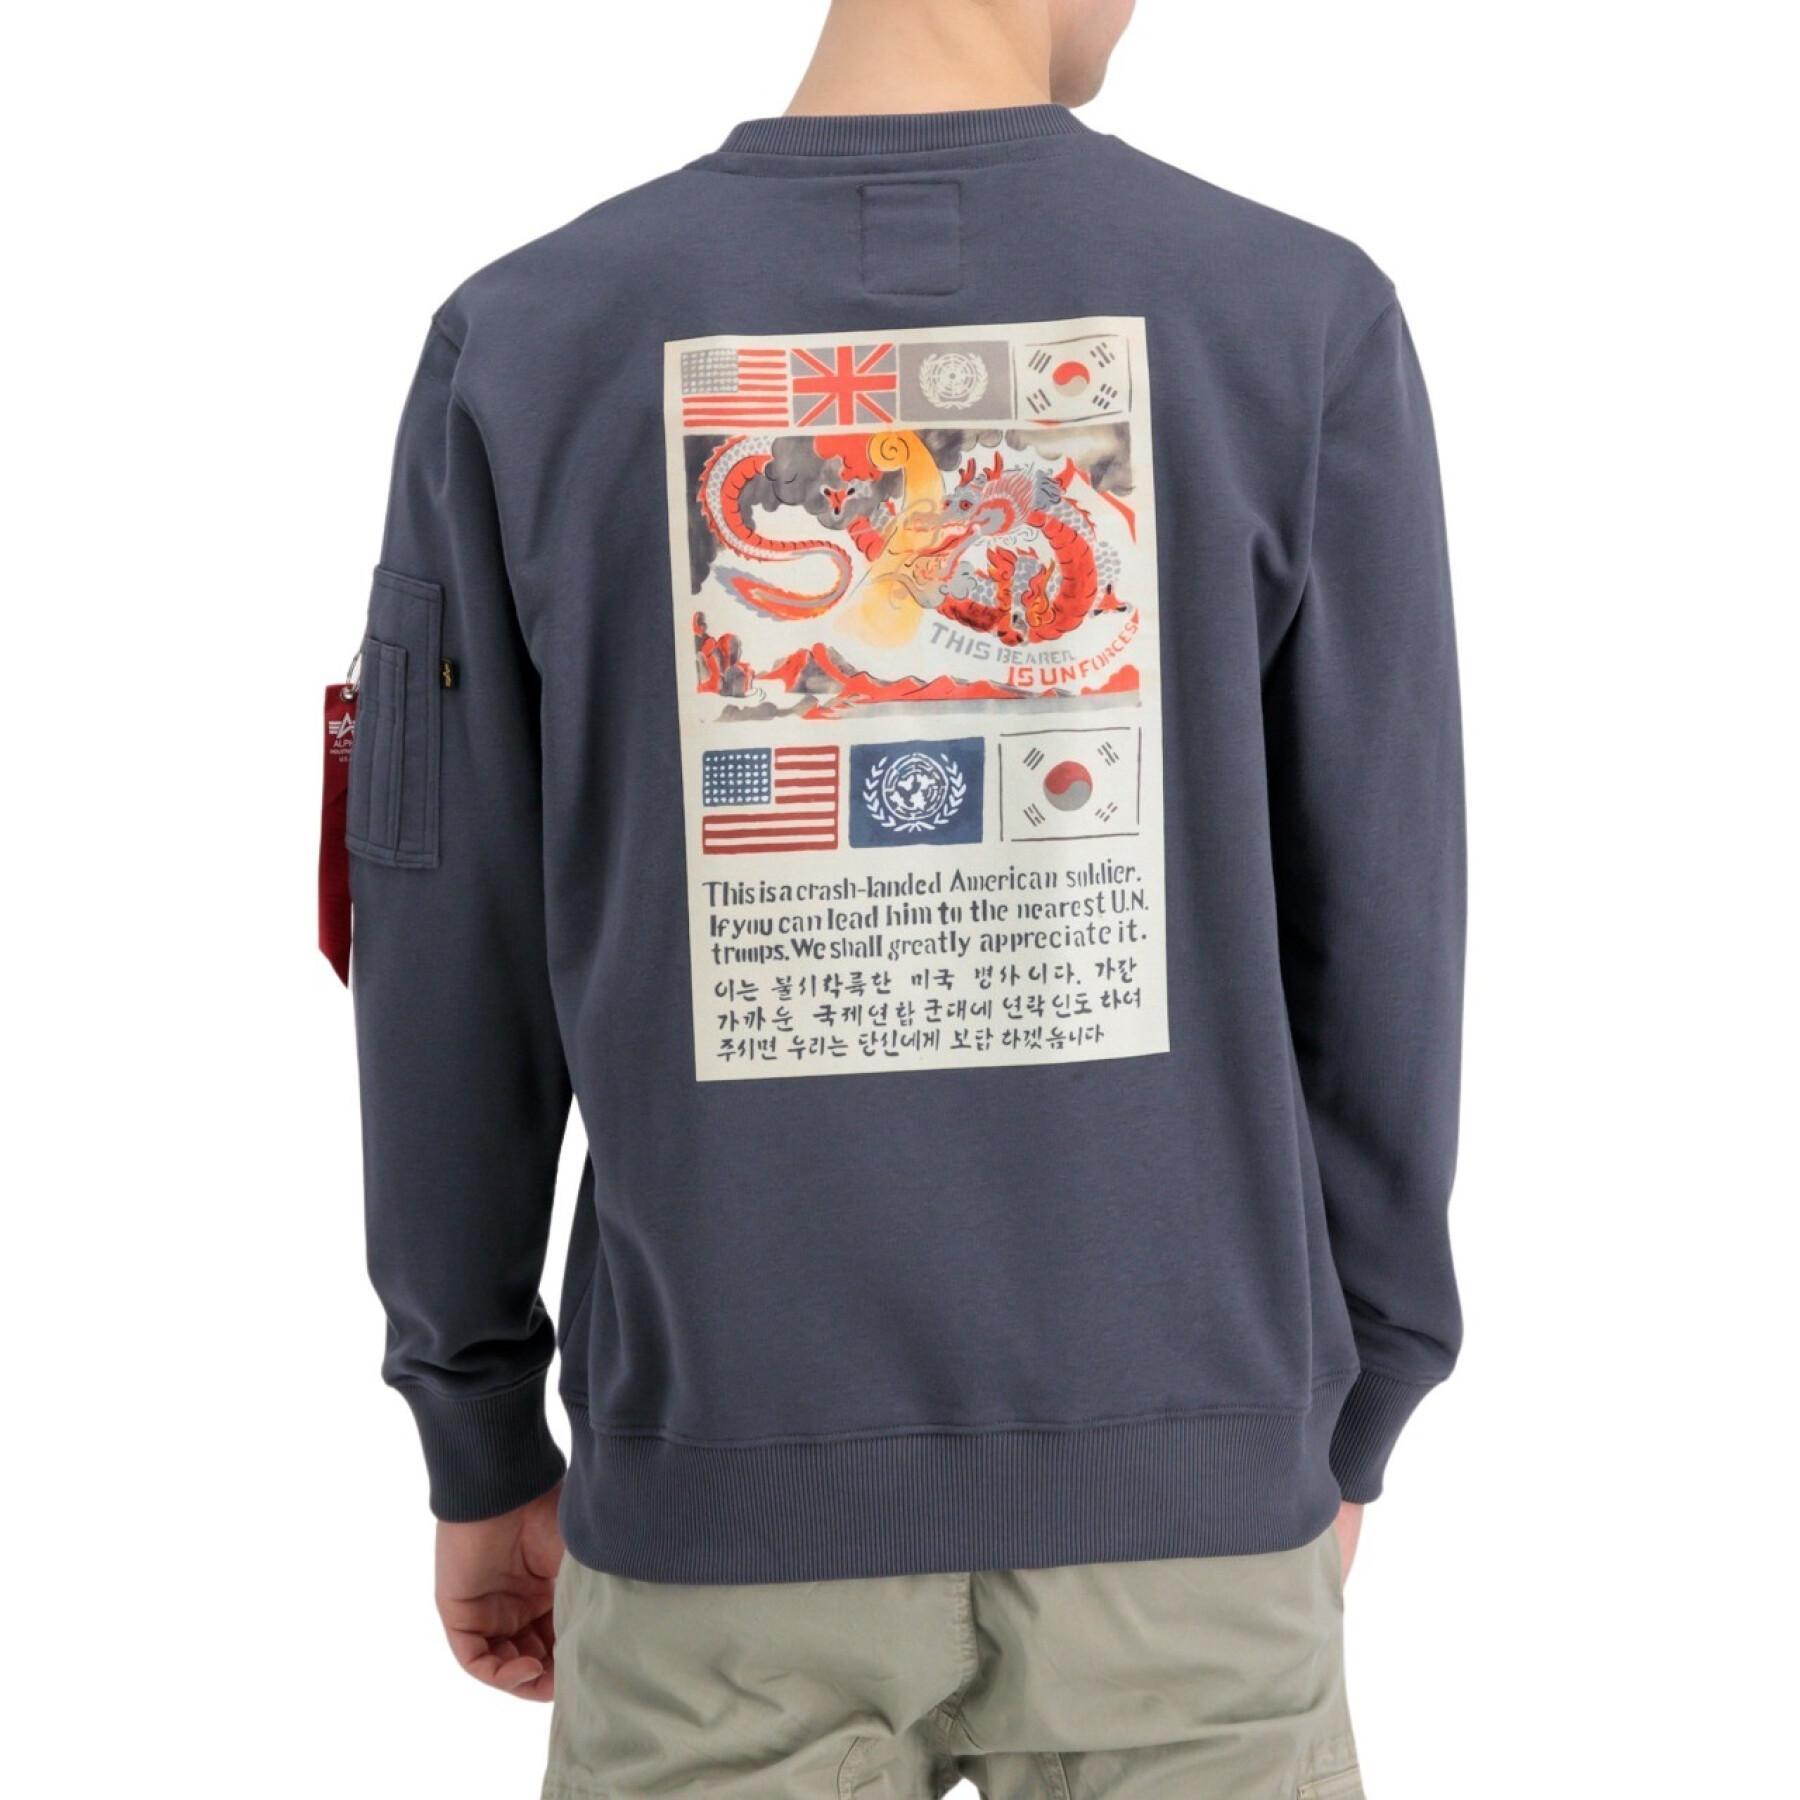 Pullover Alpha Industries USN Blood Chit